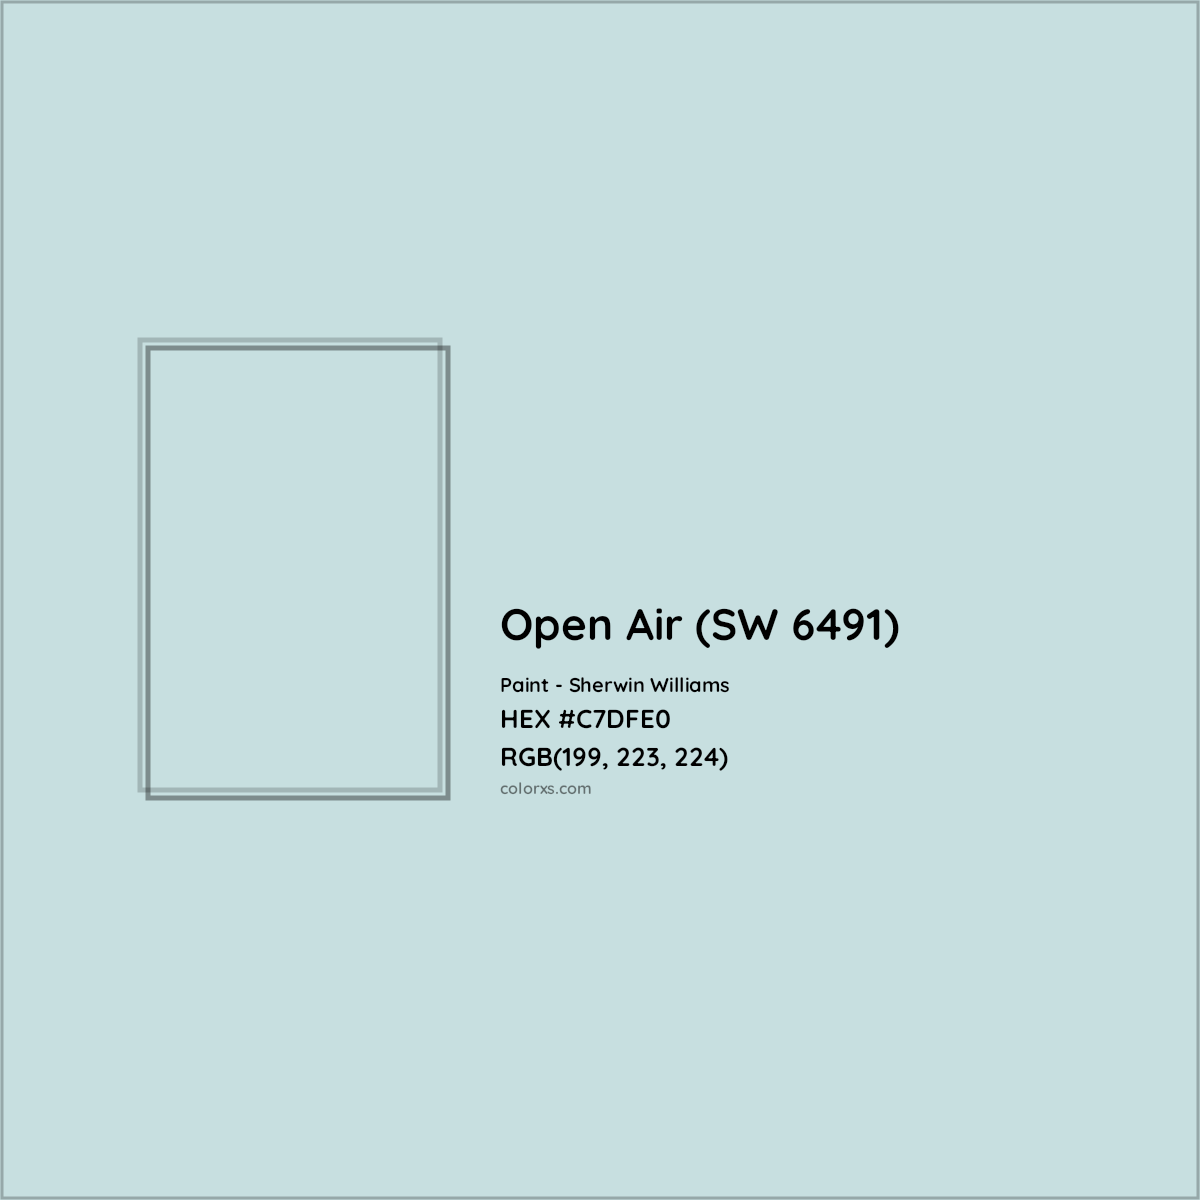 HEX #C7DFE0 Open Air (SW 6491) Paint Sherwin Williams - Color Code